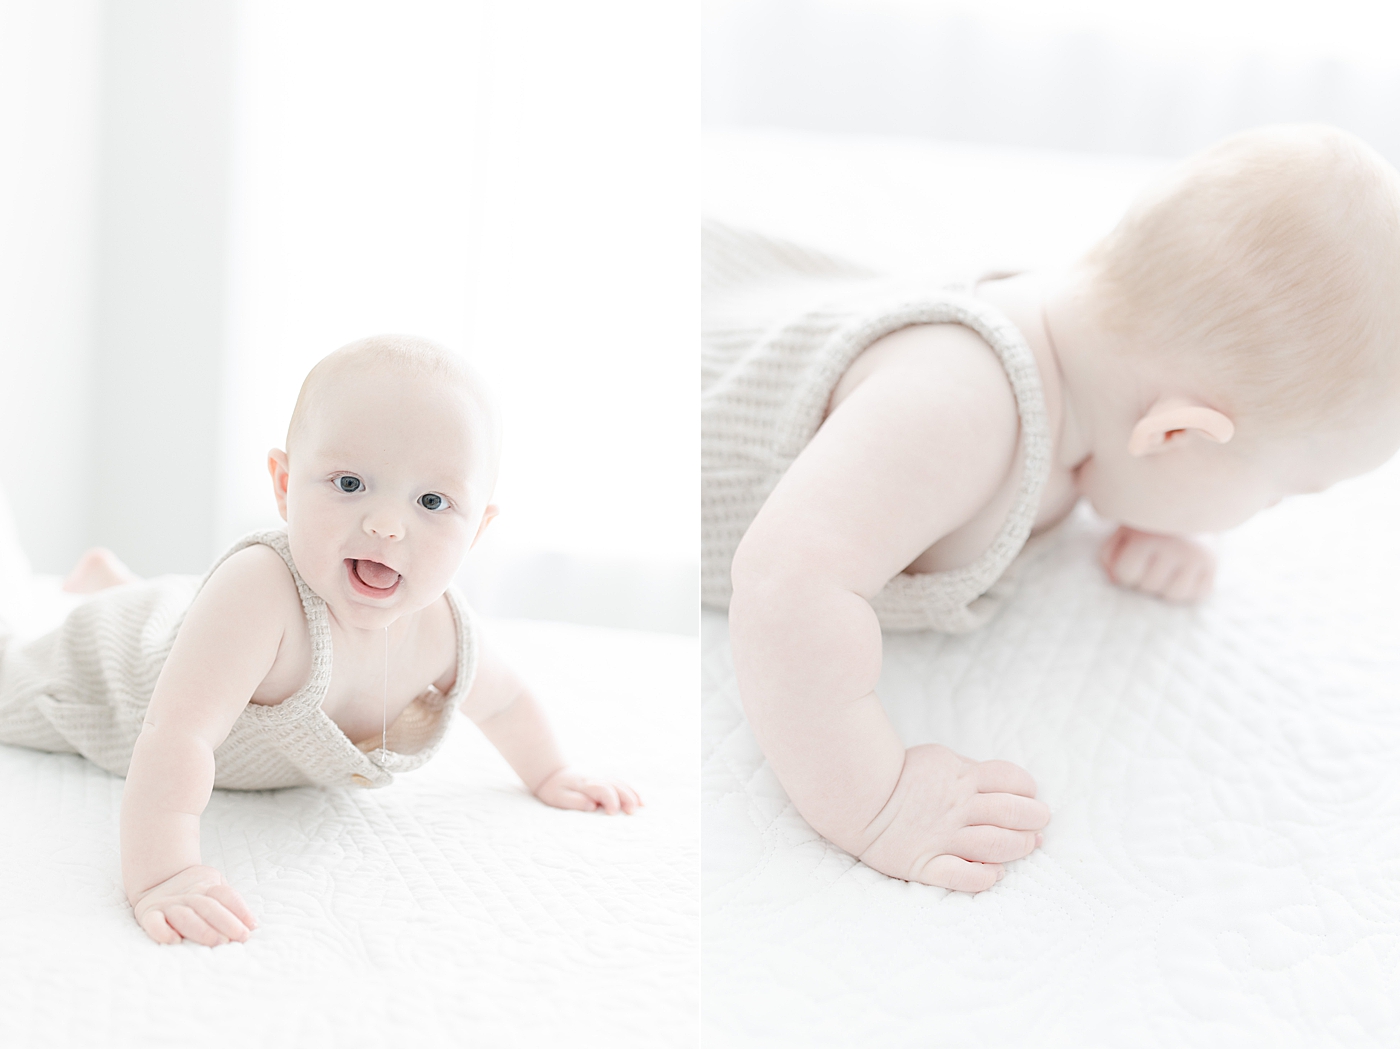 Six month old pushing up on his arms and drooling. Photo by Little Sunshine Photography